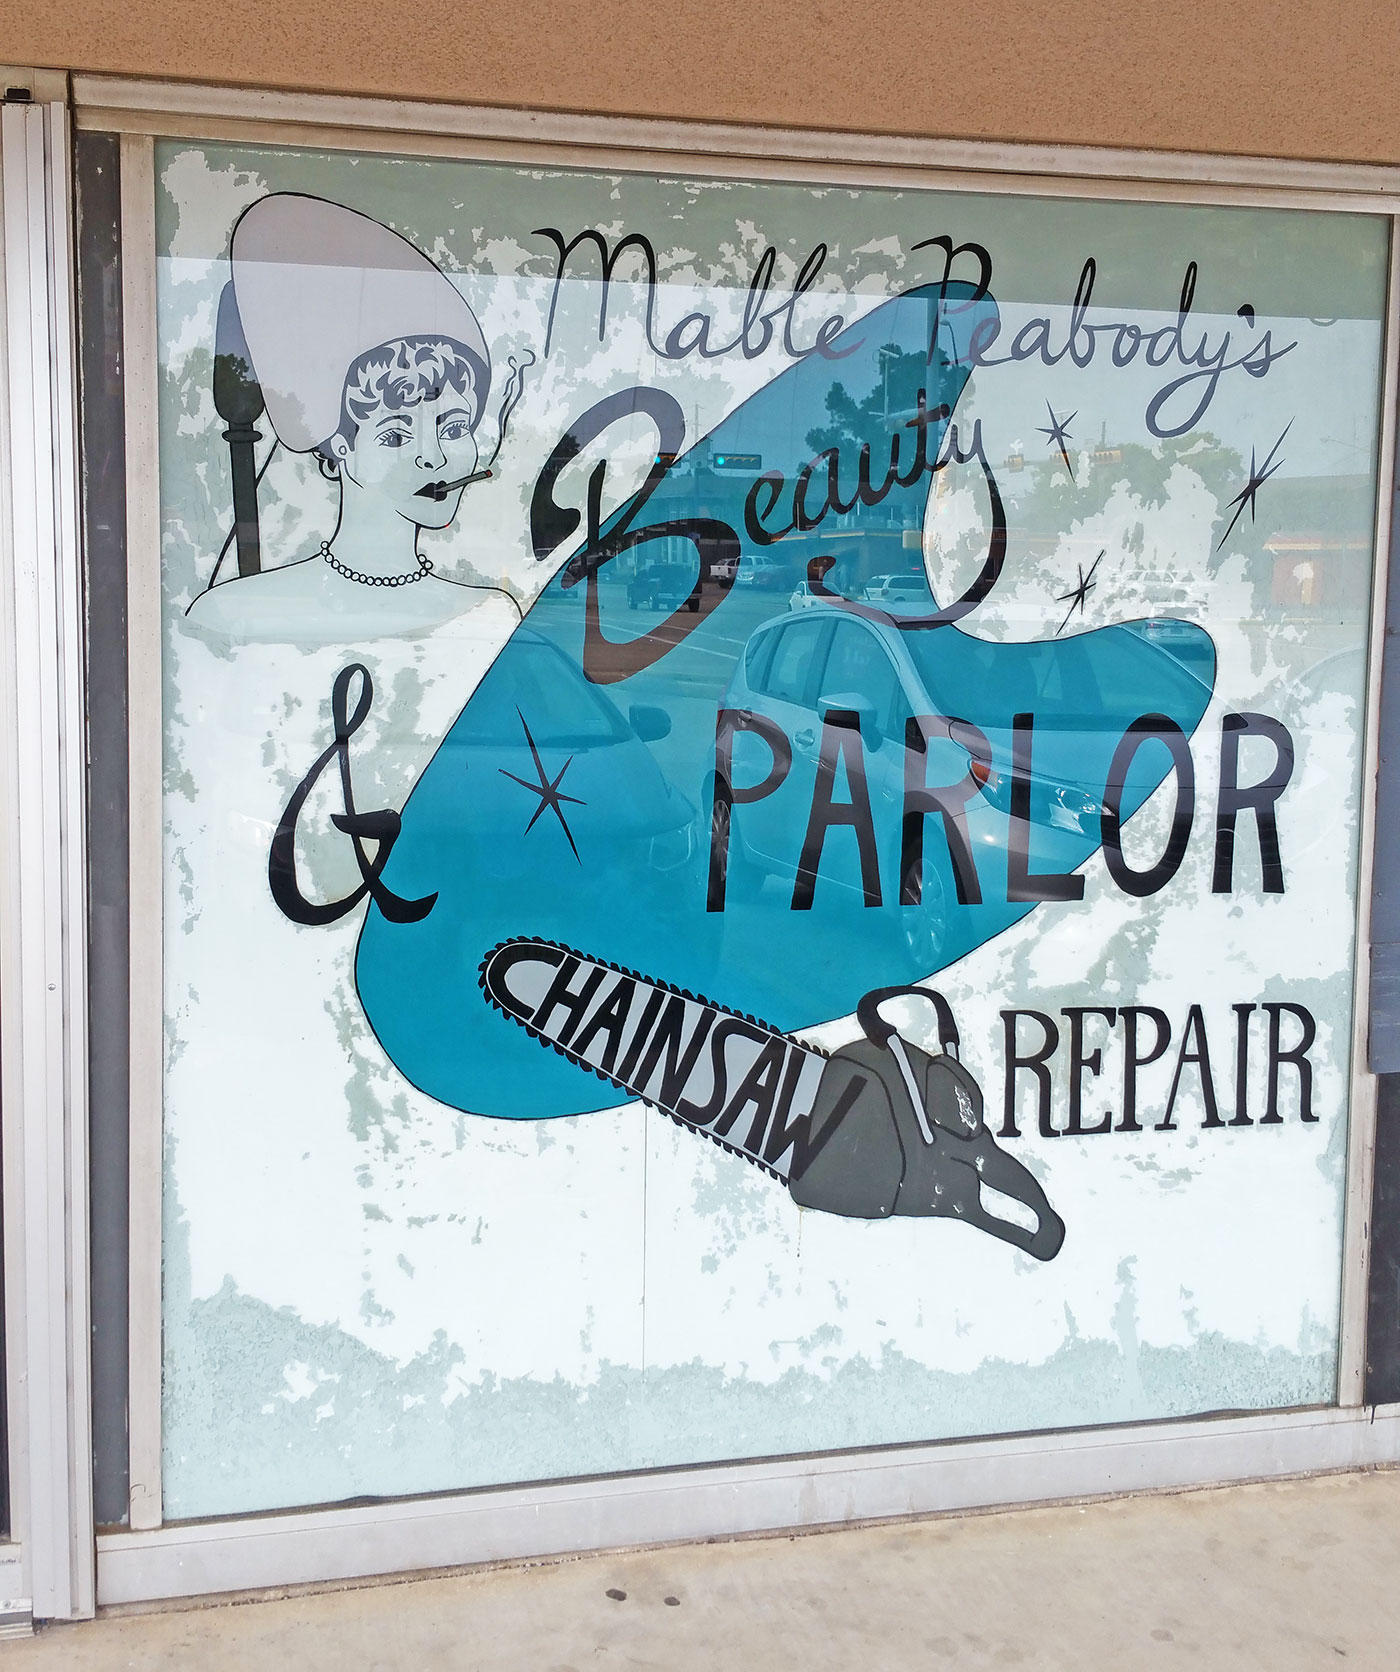 Maple Peabody's Beauty Parlor and Chainsaw Repair